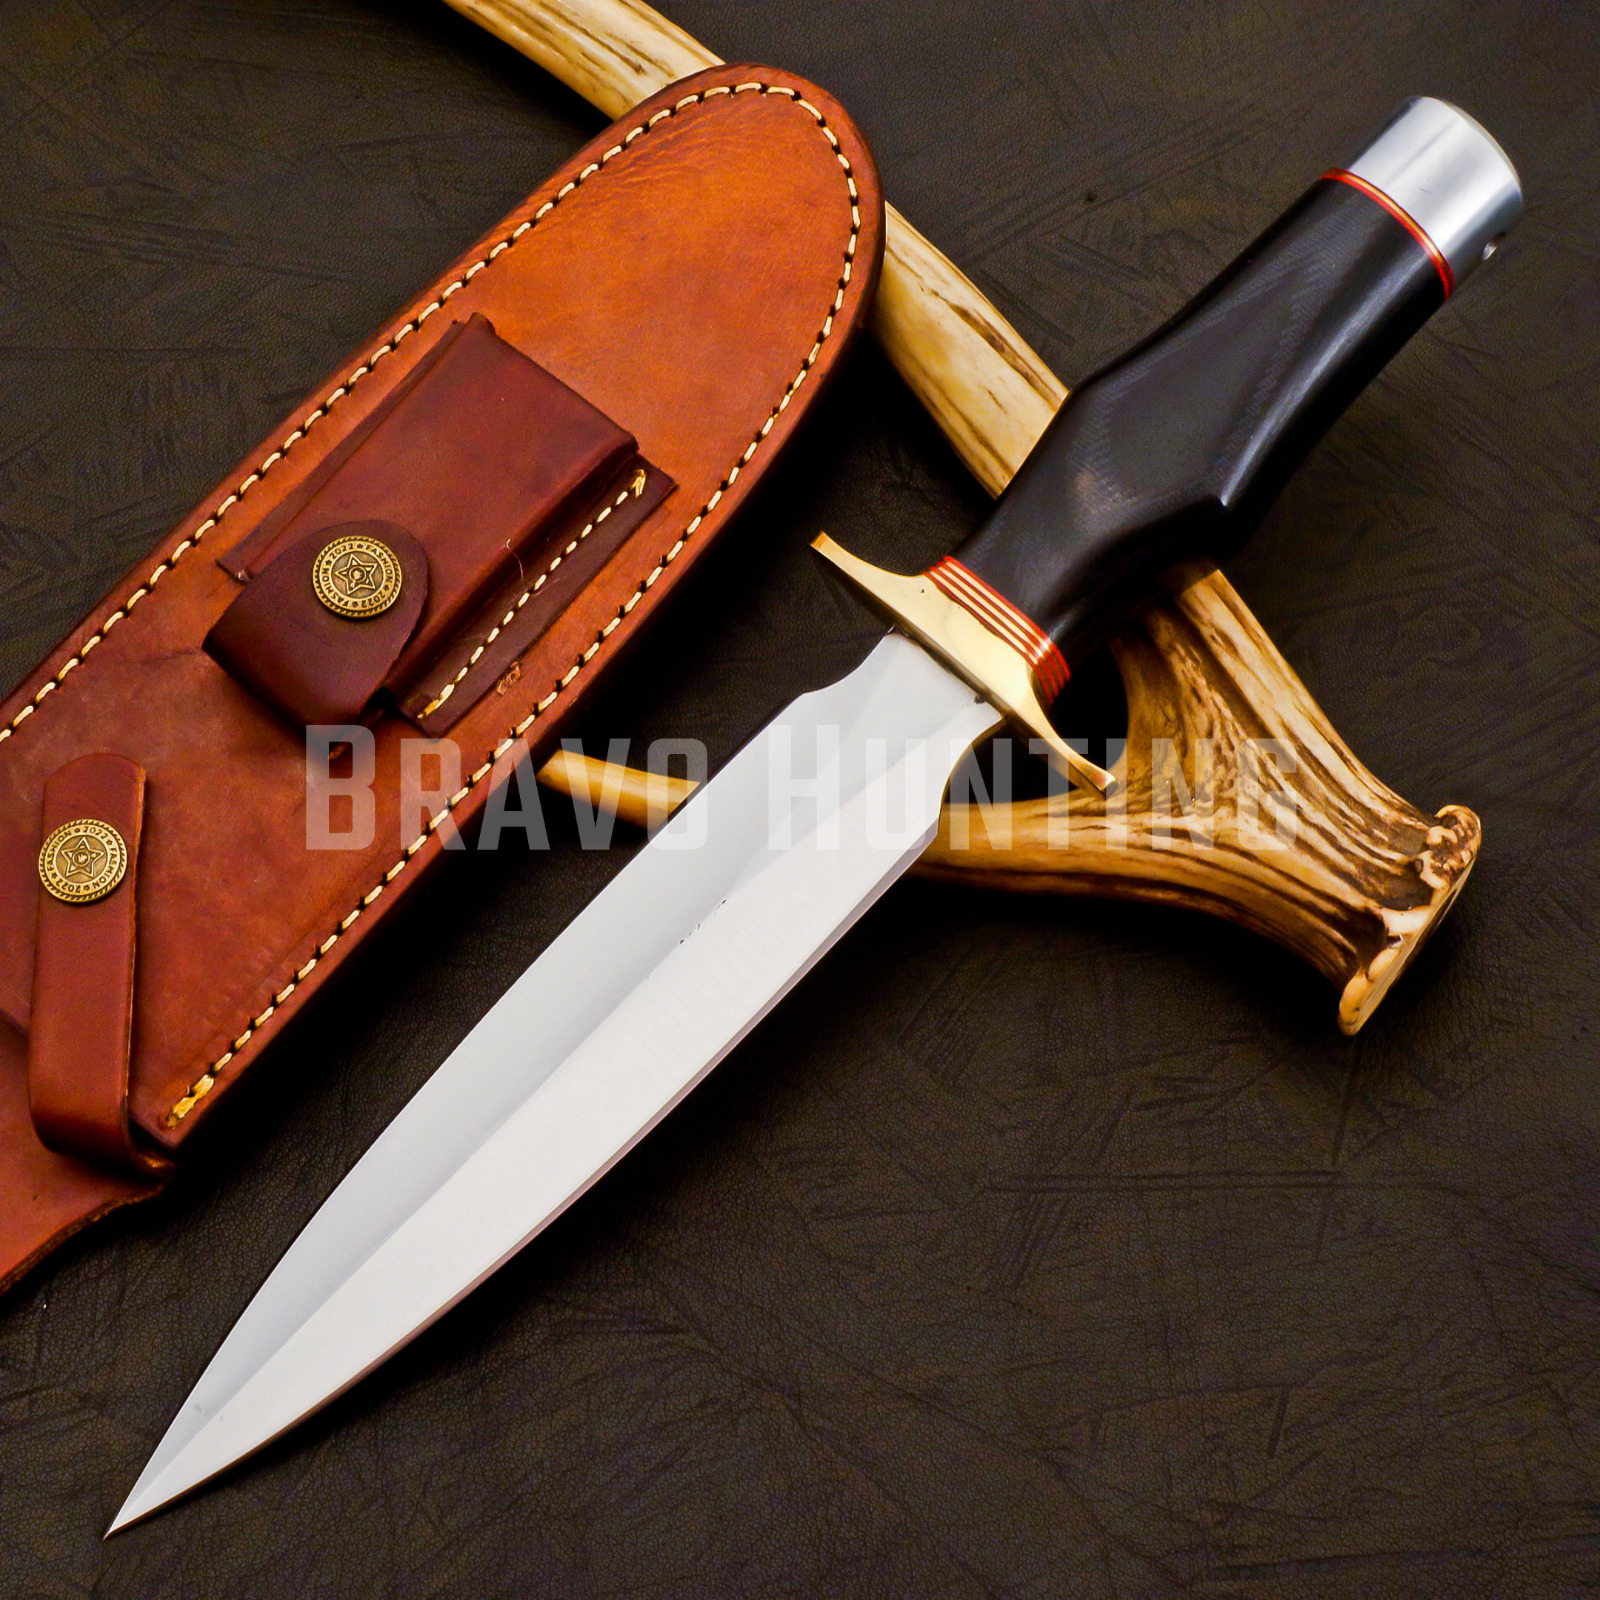 Handmade Randall Model 2 Style Steel Hunting Dagger, Bowie knife, Tactical Knive